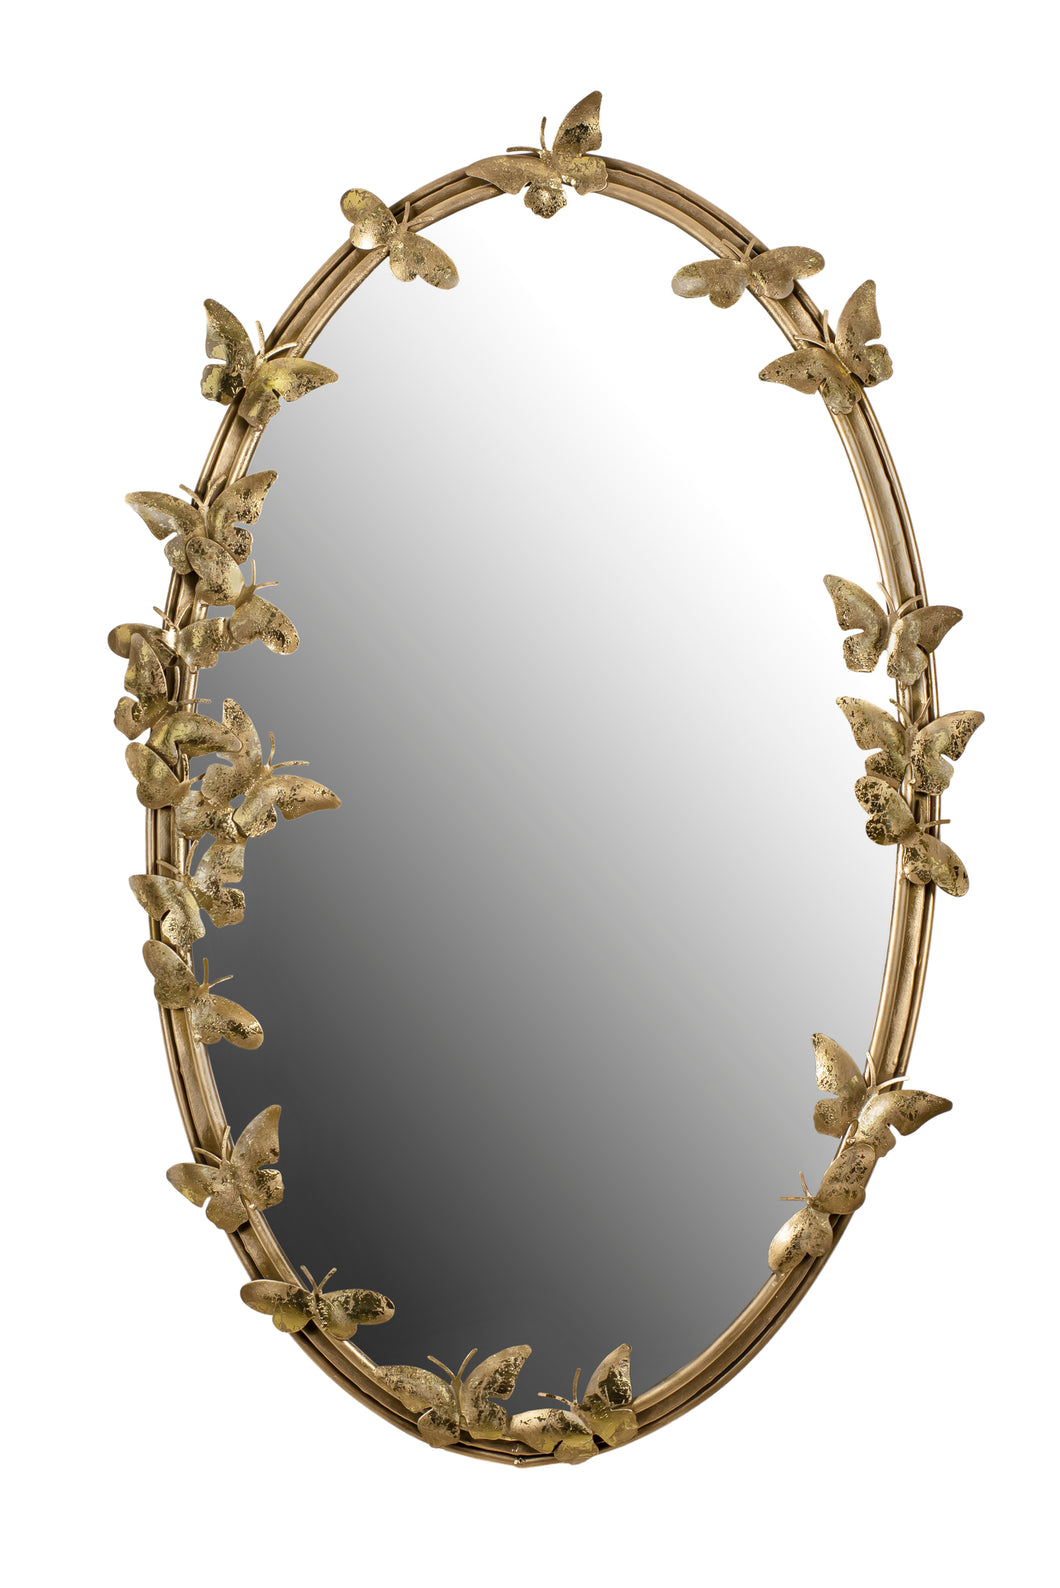 Oval Mirror with Butterflies Around